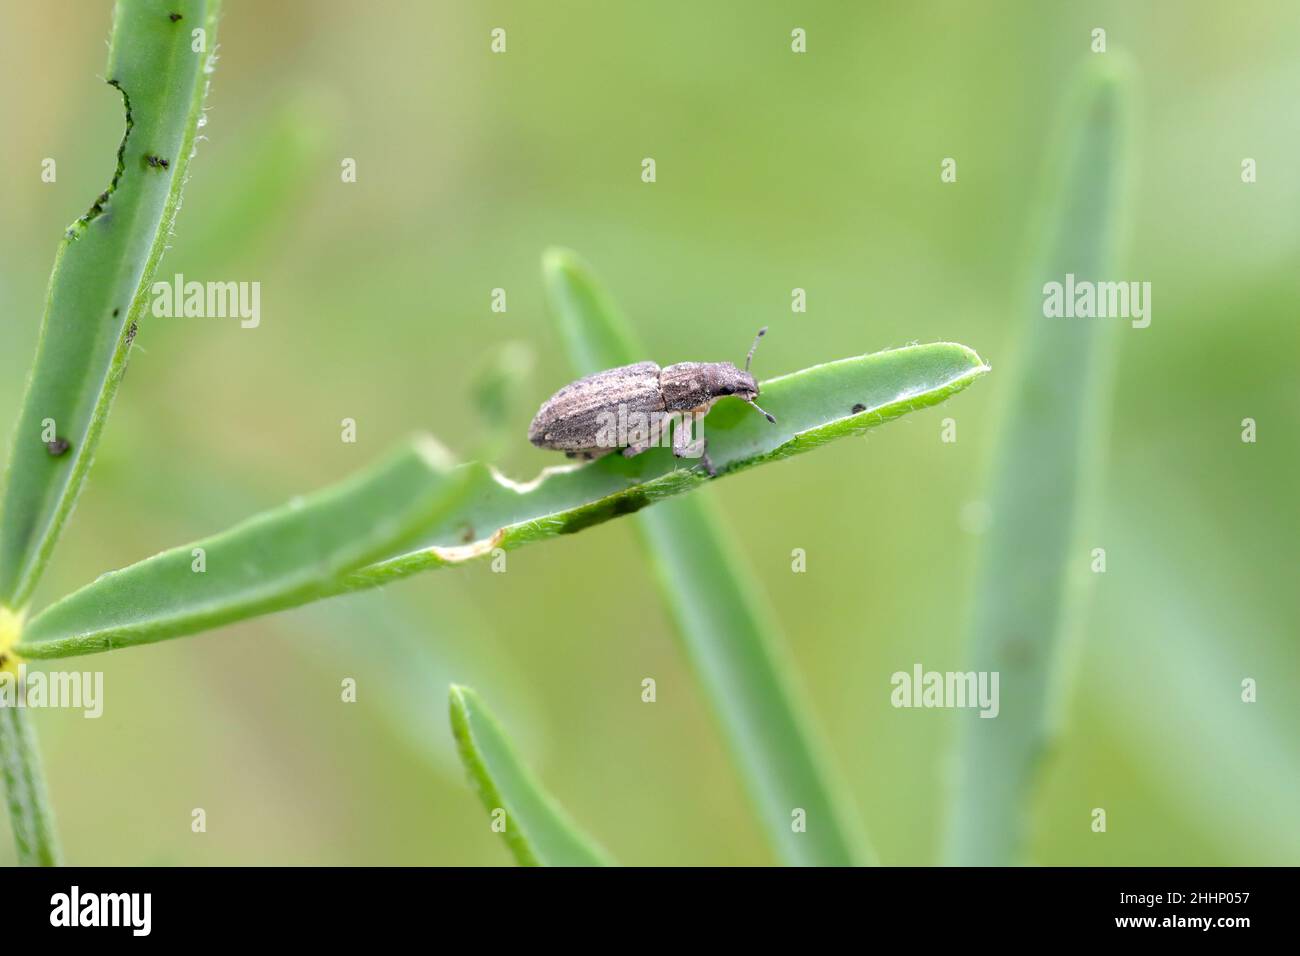 Legume lupine sprouts damaged by the insect pests - Sitona griseus. Stock Photo